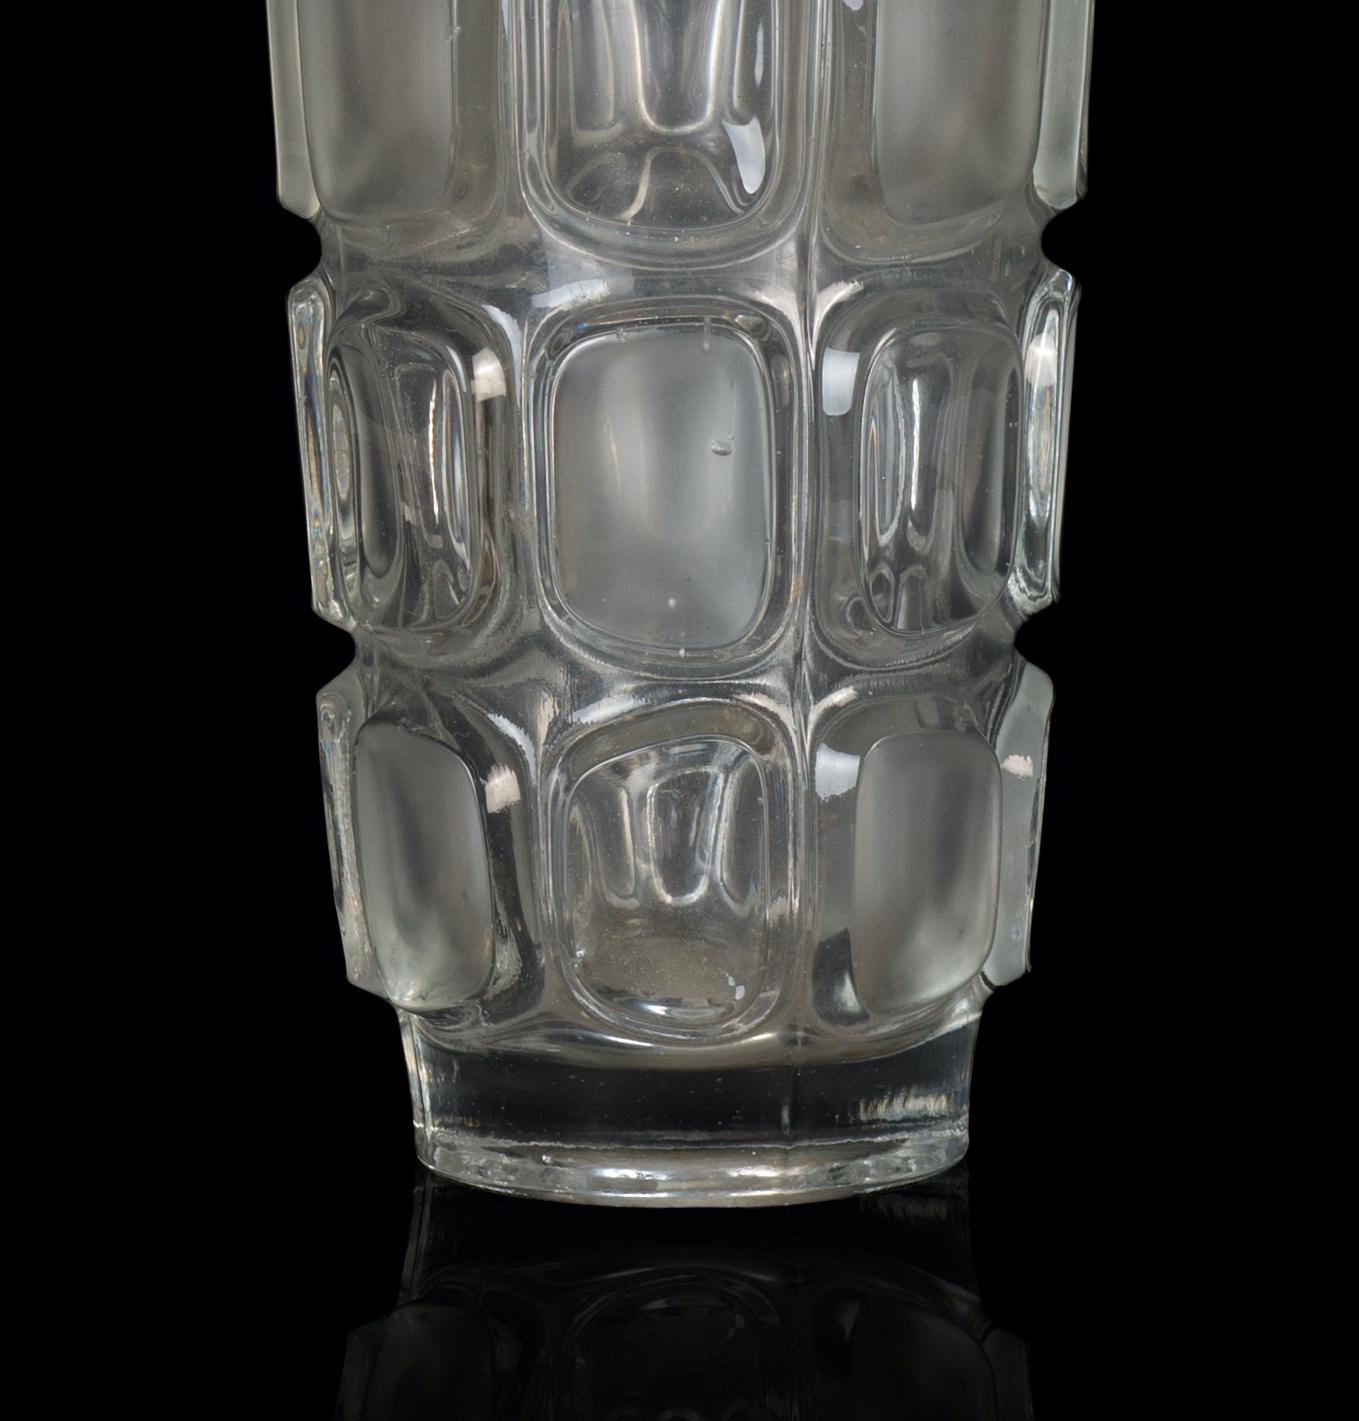 Cylindrical glass vase is a wonderful glass decorative object, realized by an italian manufacture during the 1970s.

Very fashionable vase with rectangular decorations in relief along the body.

Good conditions.